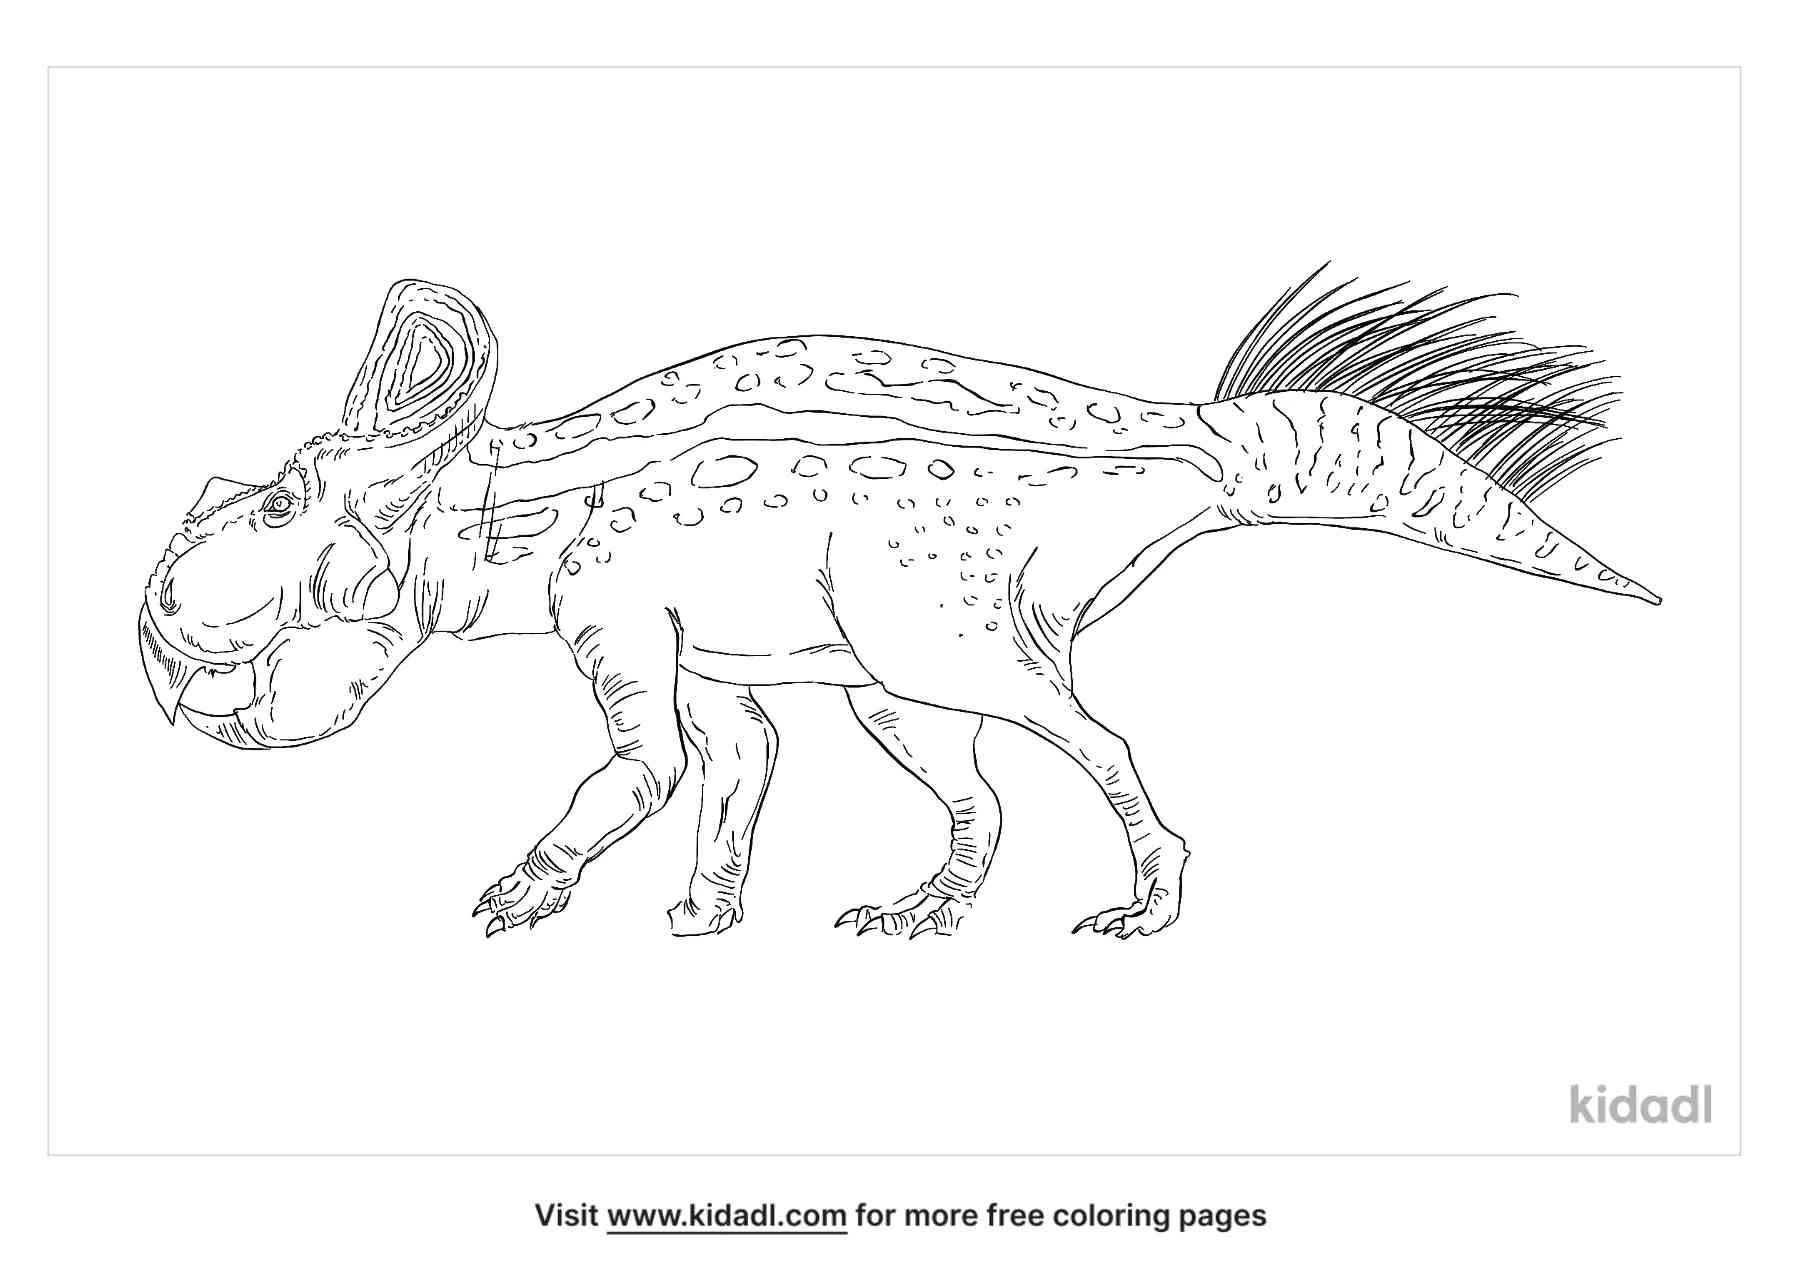 Protoceratops that lived in asia